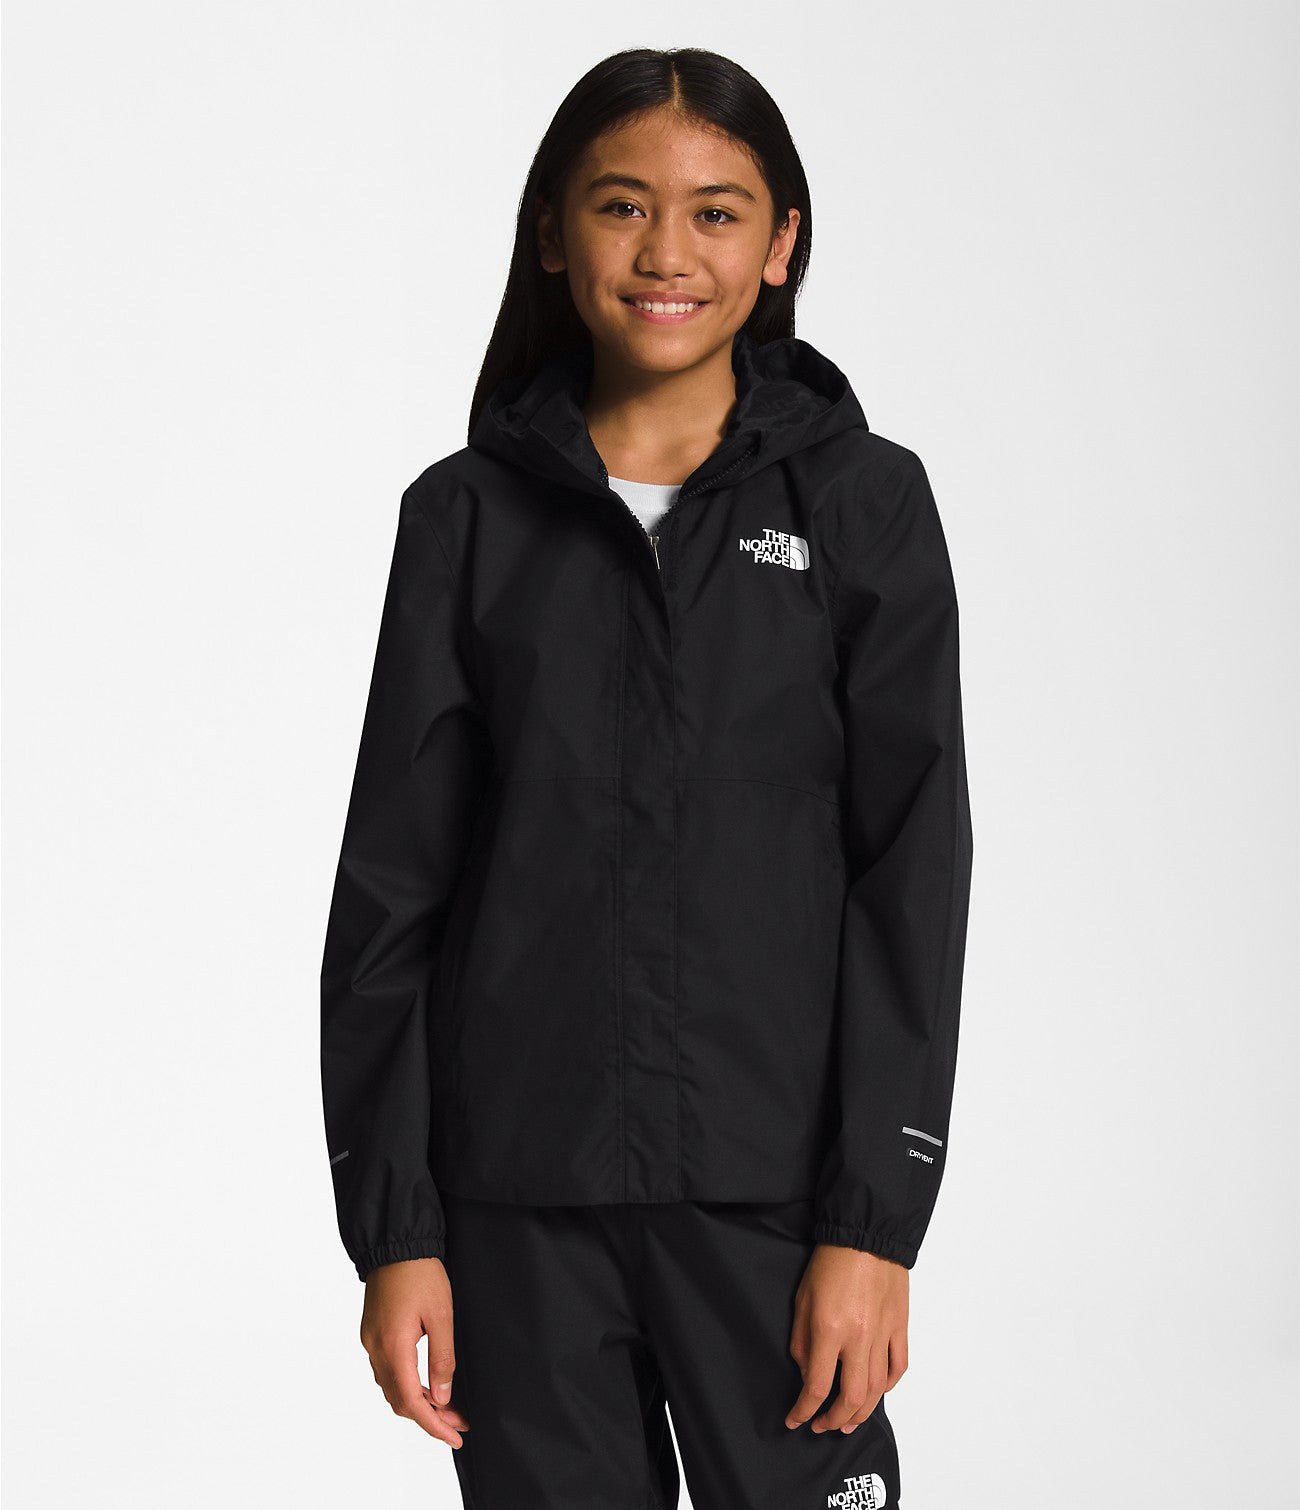 Smiling girl wearing Black The North Face Girls' Warm Storm Jacket - Mountain Kids Outfitters: Stylish and Weather-Ready Outerwear